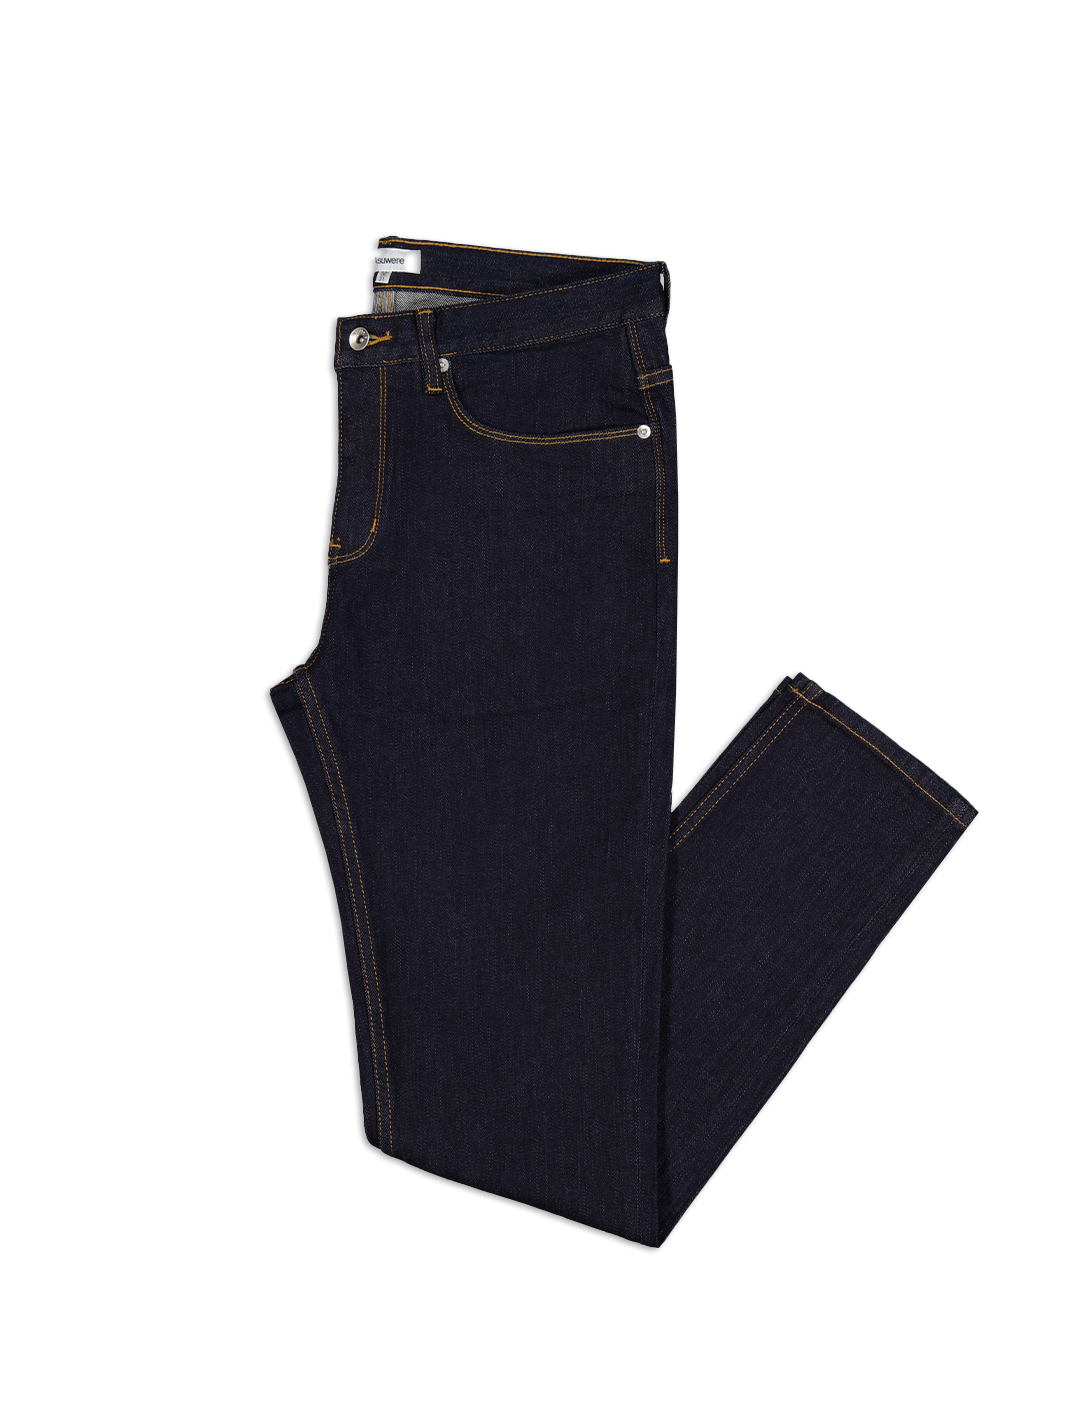 The Asuwere Jean - Rinse Wash Navy